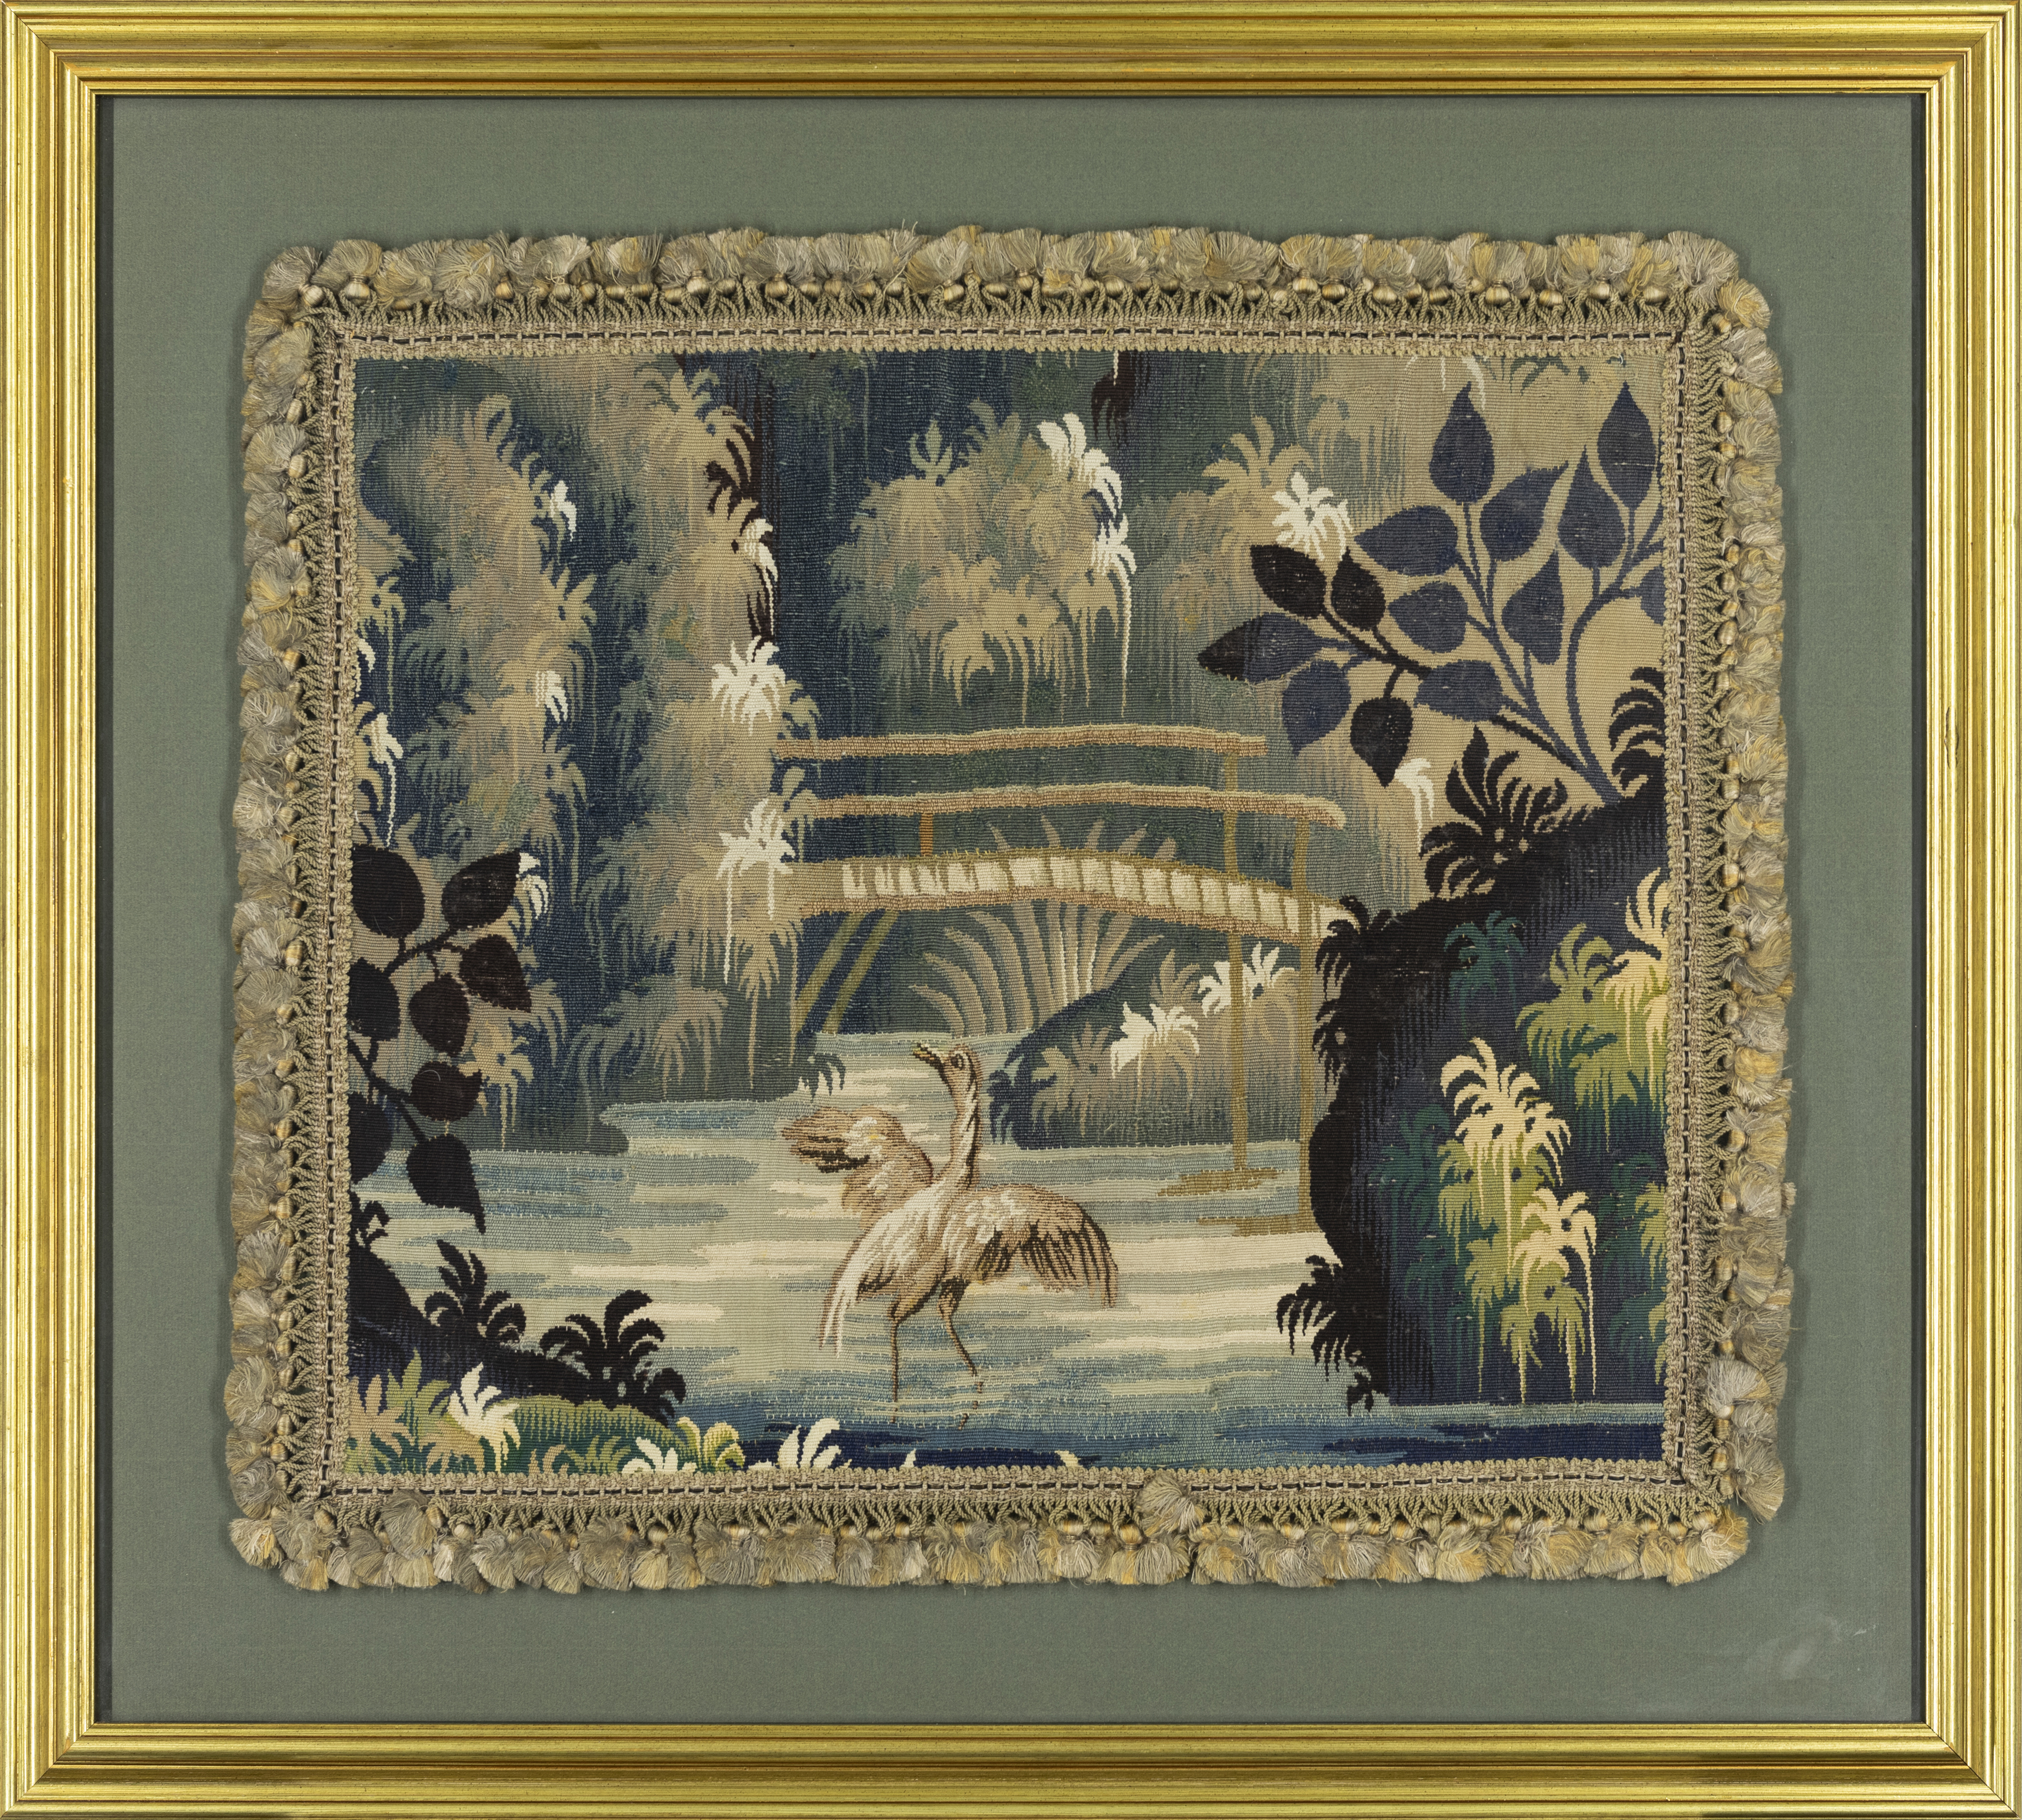 A Flemish verdure tapestry fragment, 17th century, Woven in wools and silks, depicting a heron be... - Image 2 of 2